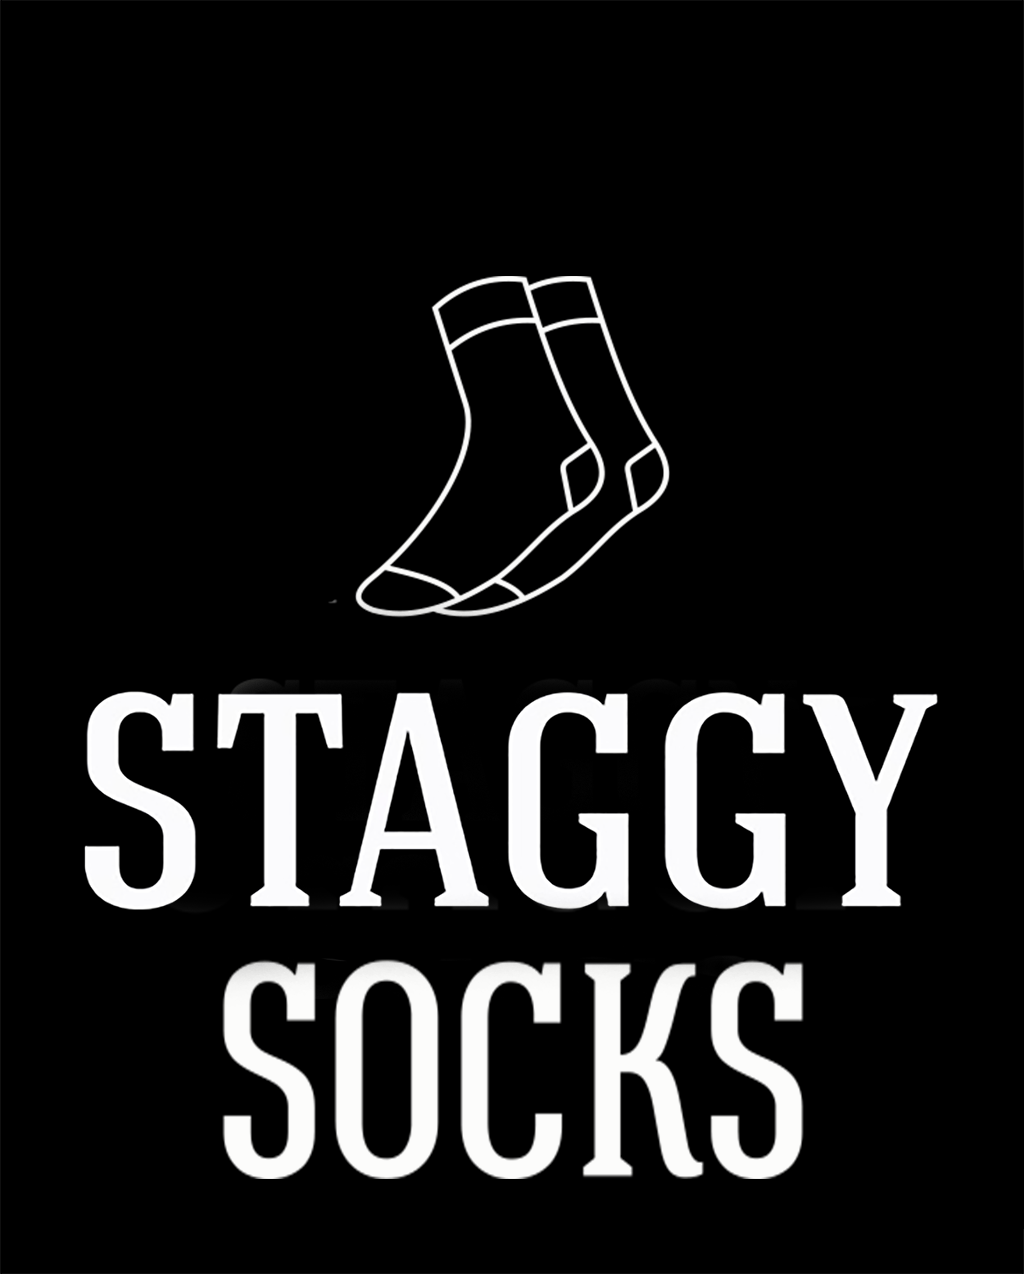 STAGGY SOCKS